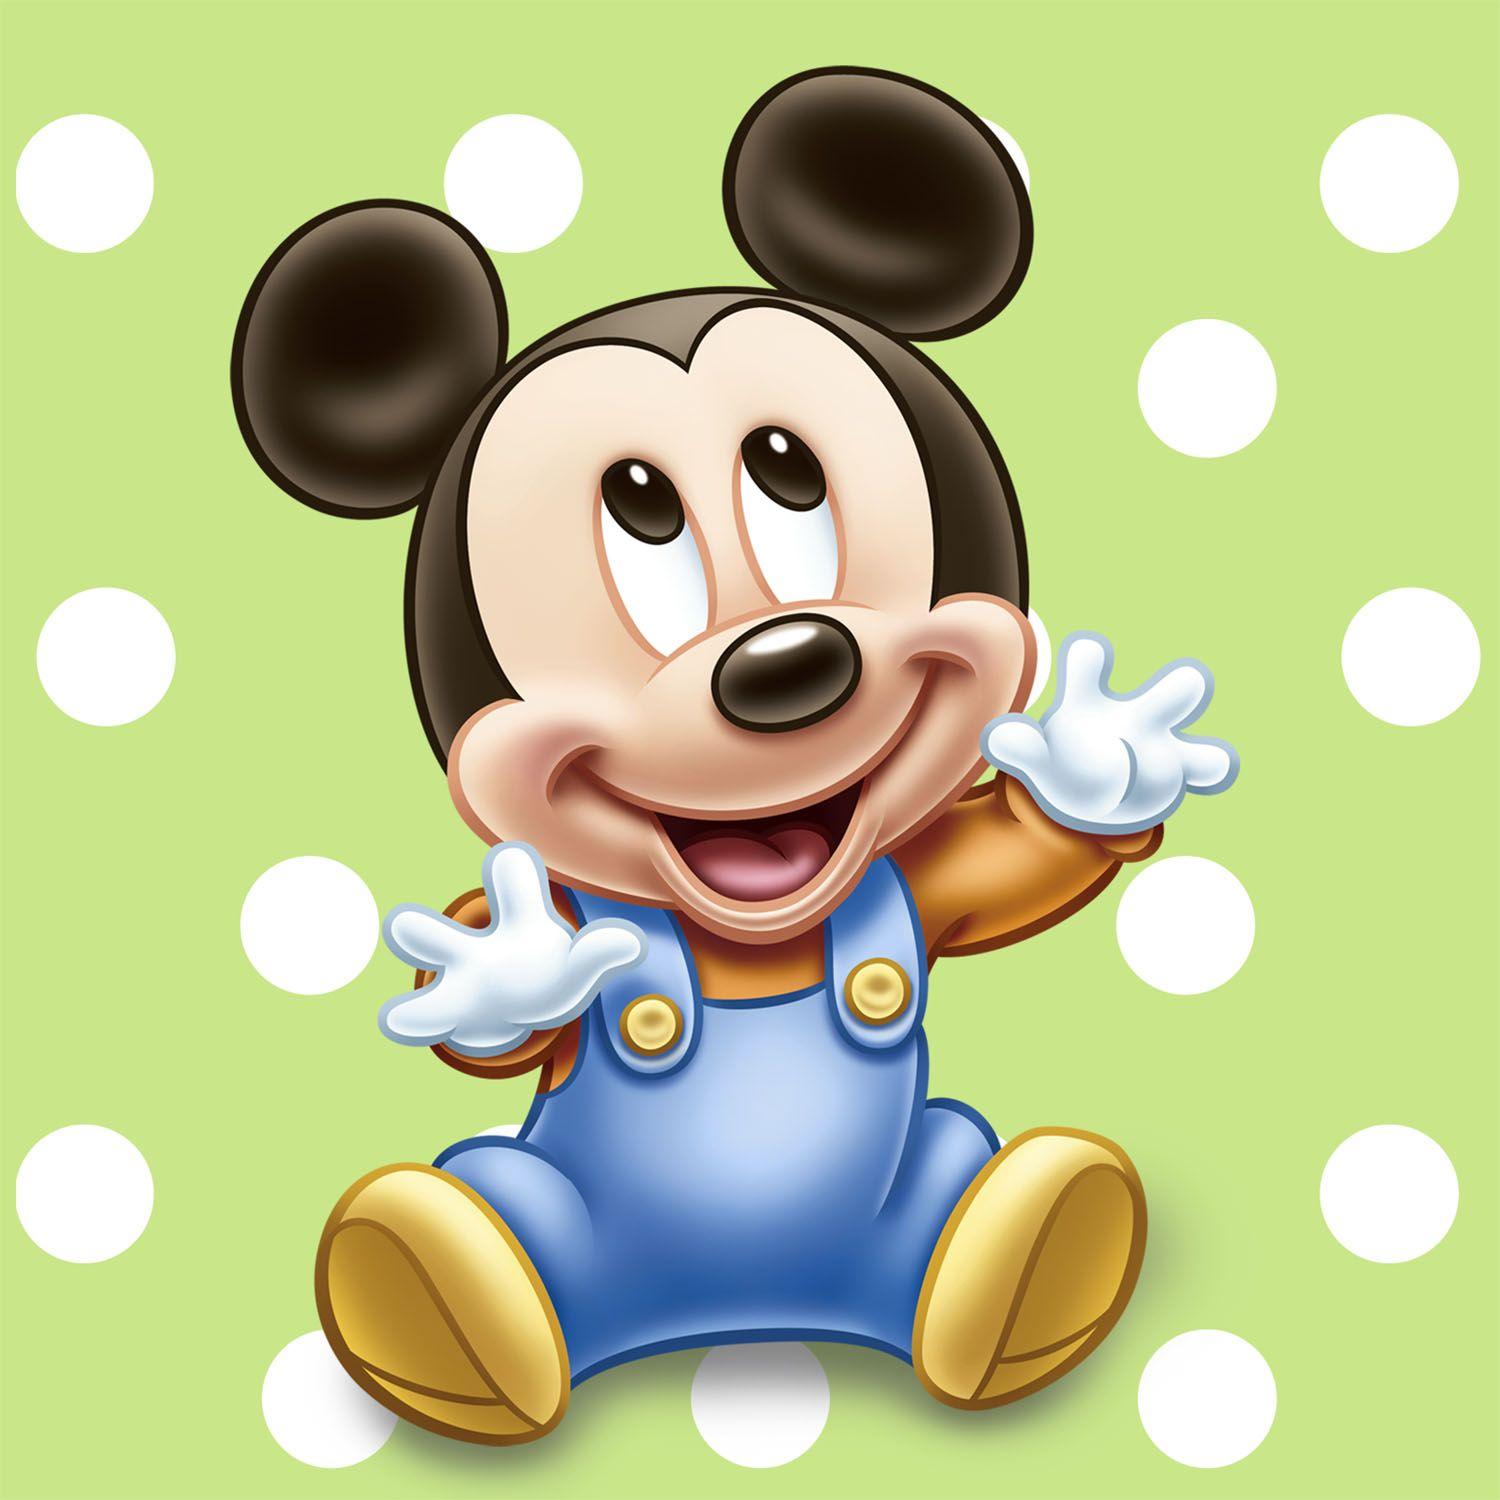 Mickey Mouse Image (24)